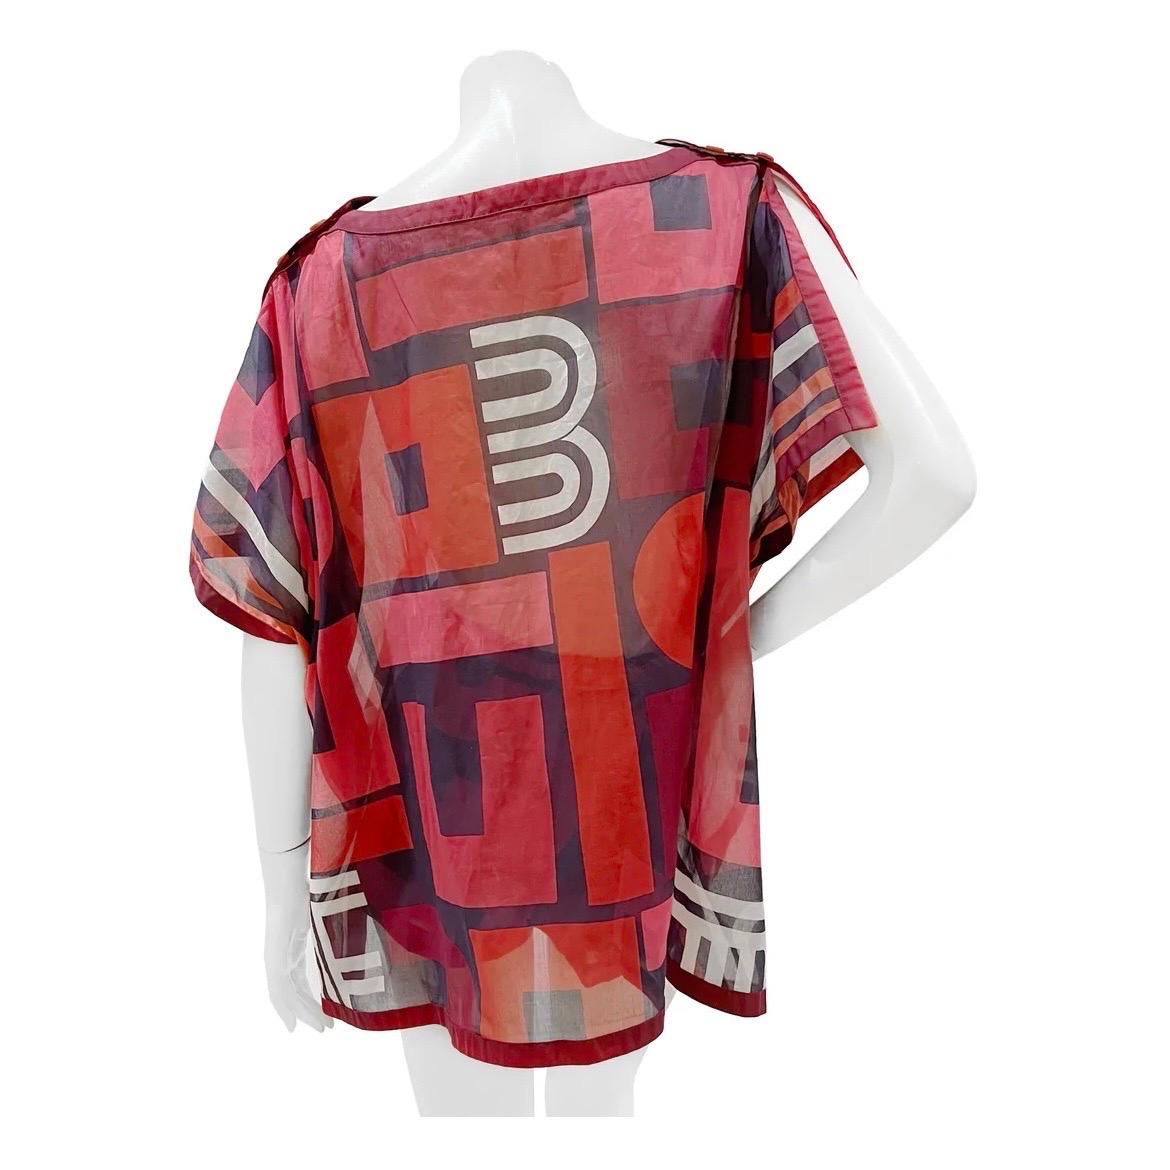 Geometric Print Sheer Poncho and Shorts Set by Hermes 
Made in France
Navy, purple, red and white geometric print 
Sheer and light fabric
Square style poncho
Poncho has dual top button closure on shoulders 
Dual button closure for arms 
Pearl